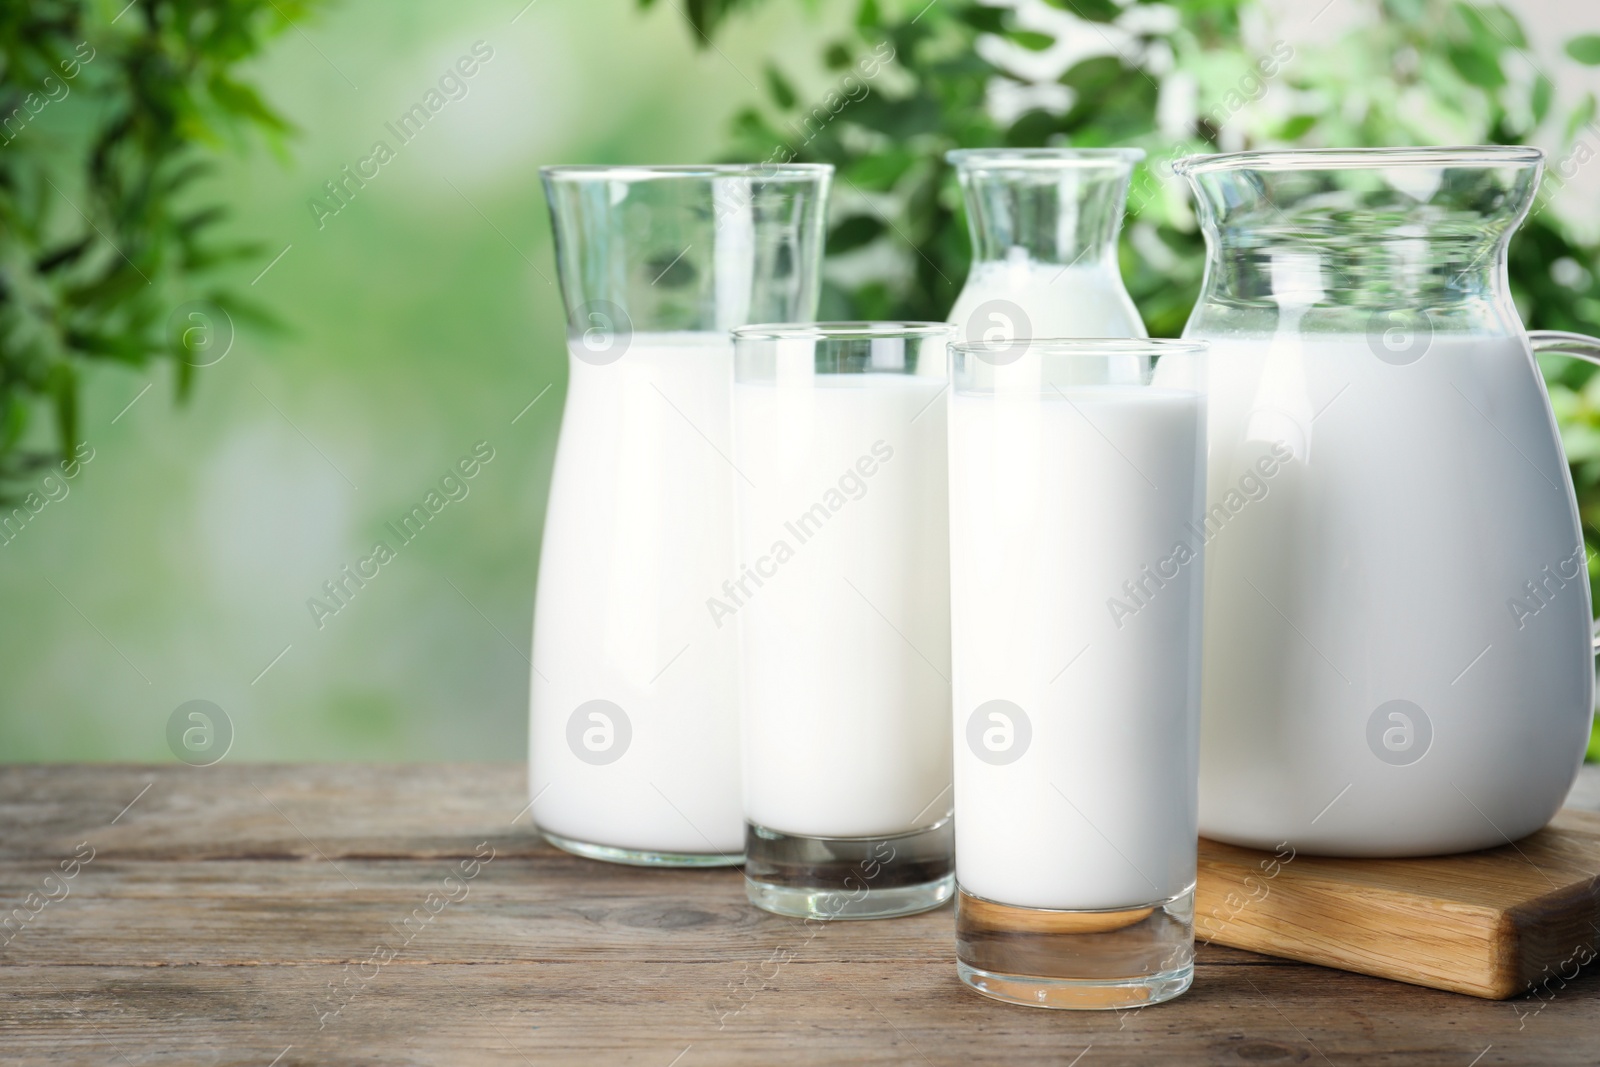 Photo of Glassware with fresh milk on wooden table against blurred background